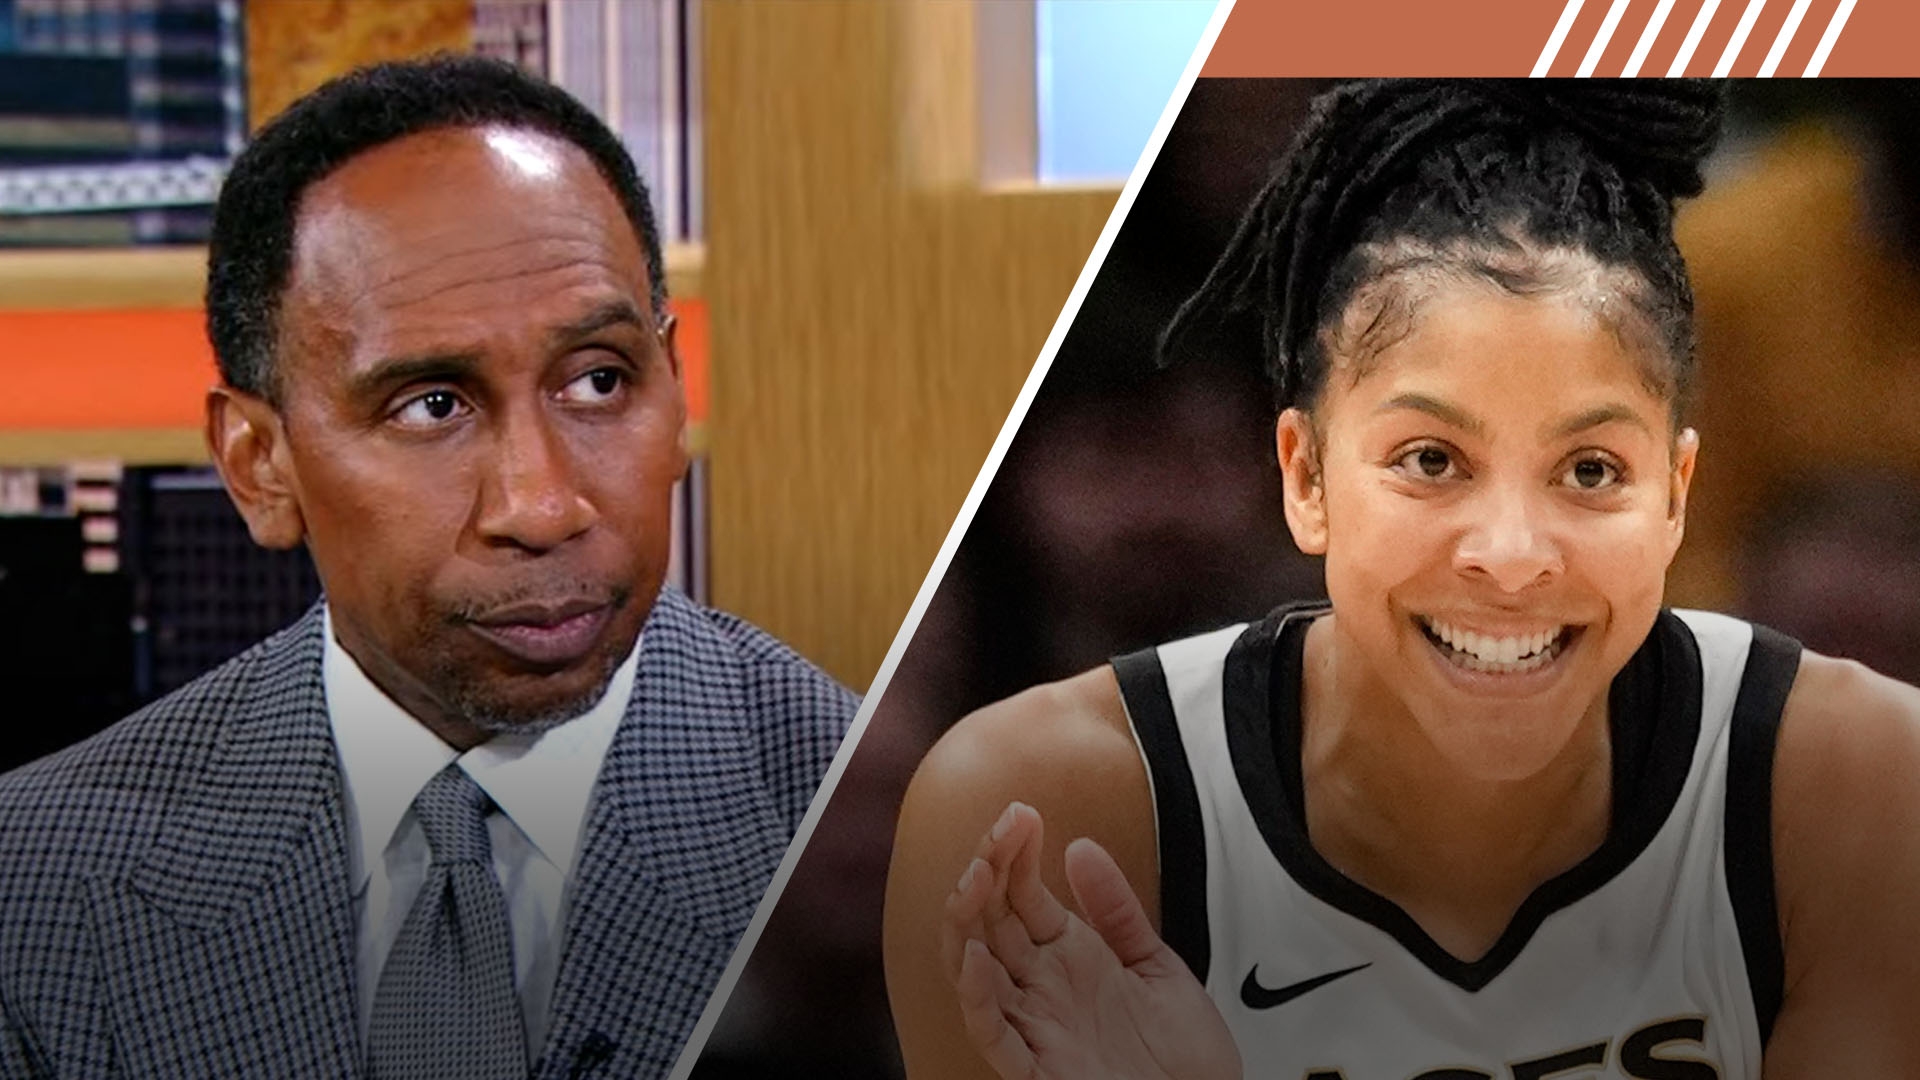 Shannon, Stephen A. reflect on Candace Parker's legendary career